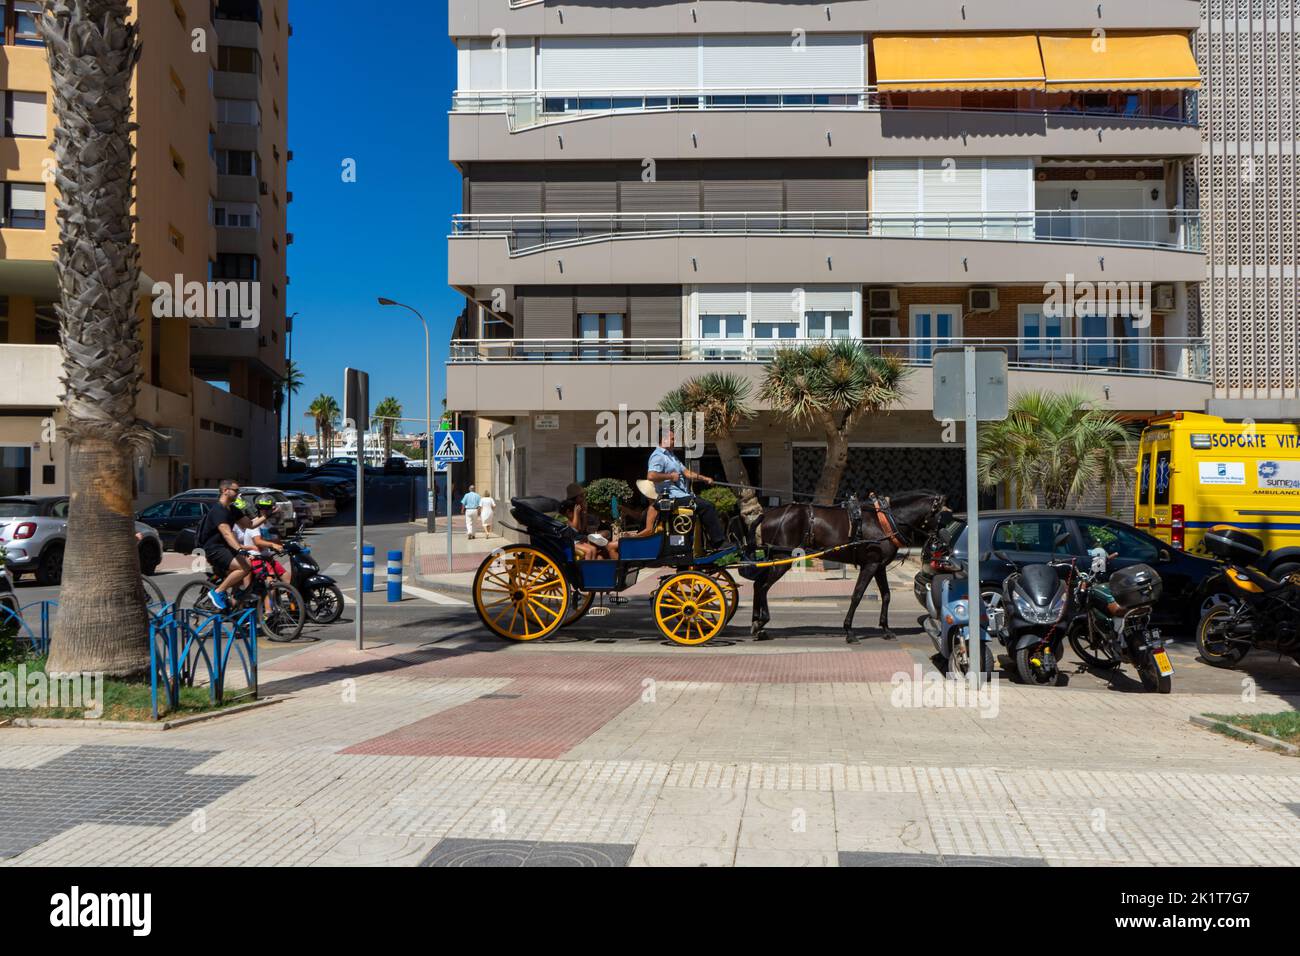 Tourists enjoying views by carriage in Malaga, Spain on September 4, 2022 Stock Photo